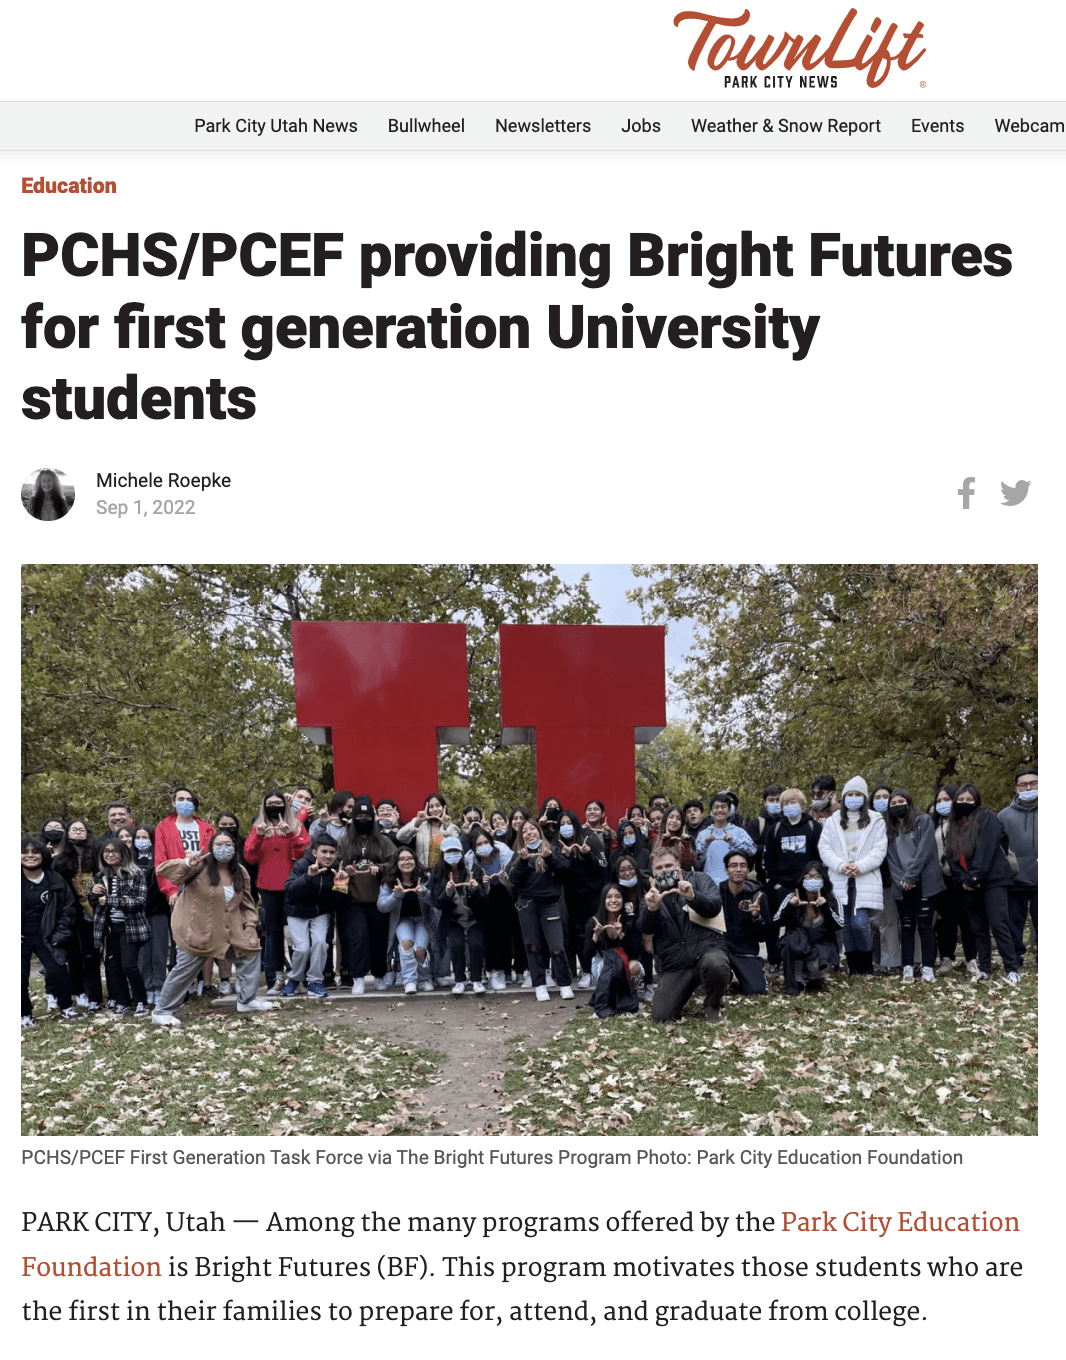 PCHS/PCEF Providing Bright Futures for First Generation University Students